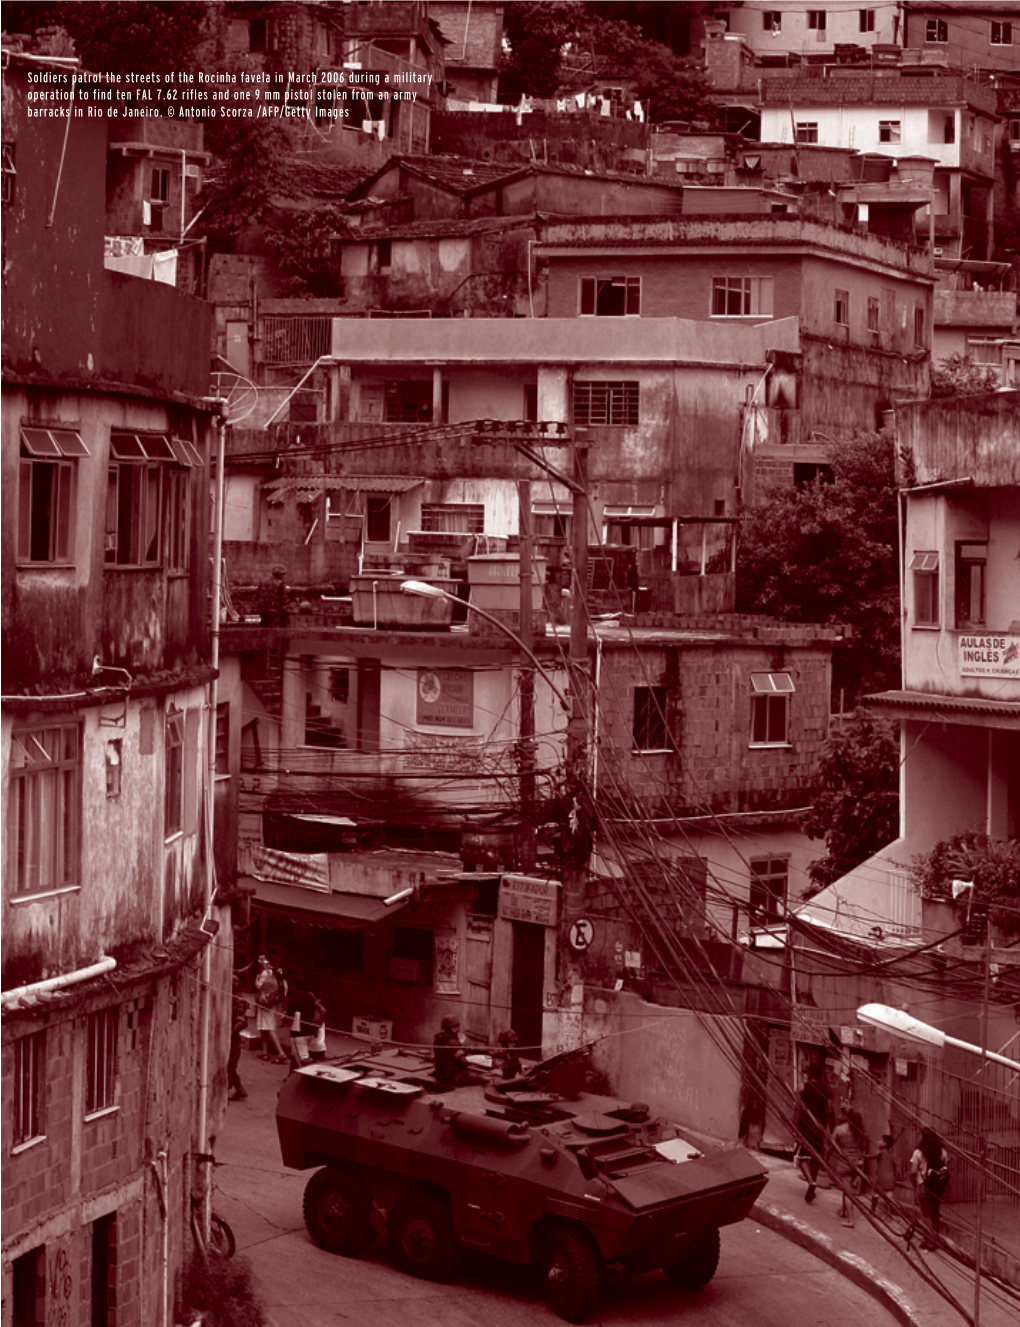 Soldiers Patrol the Streets of the Rocinha Favela in March 2006